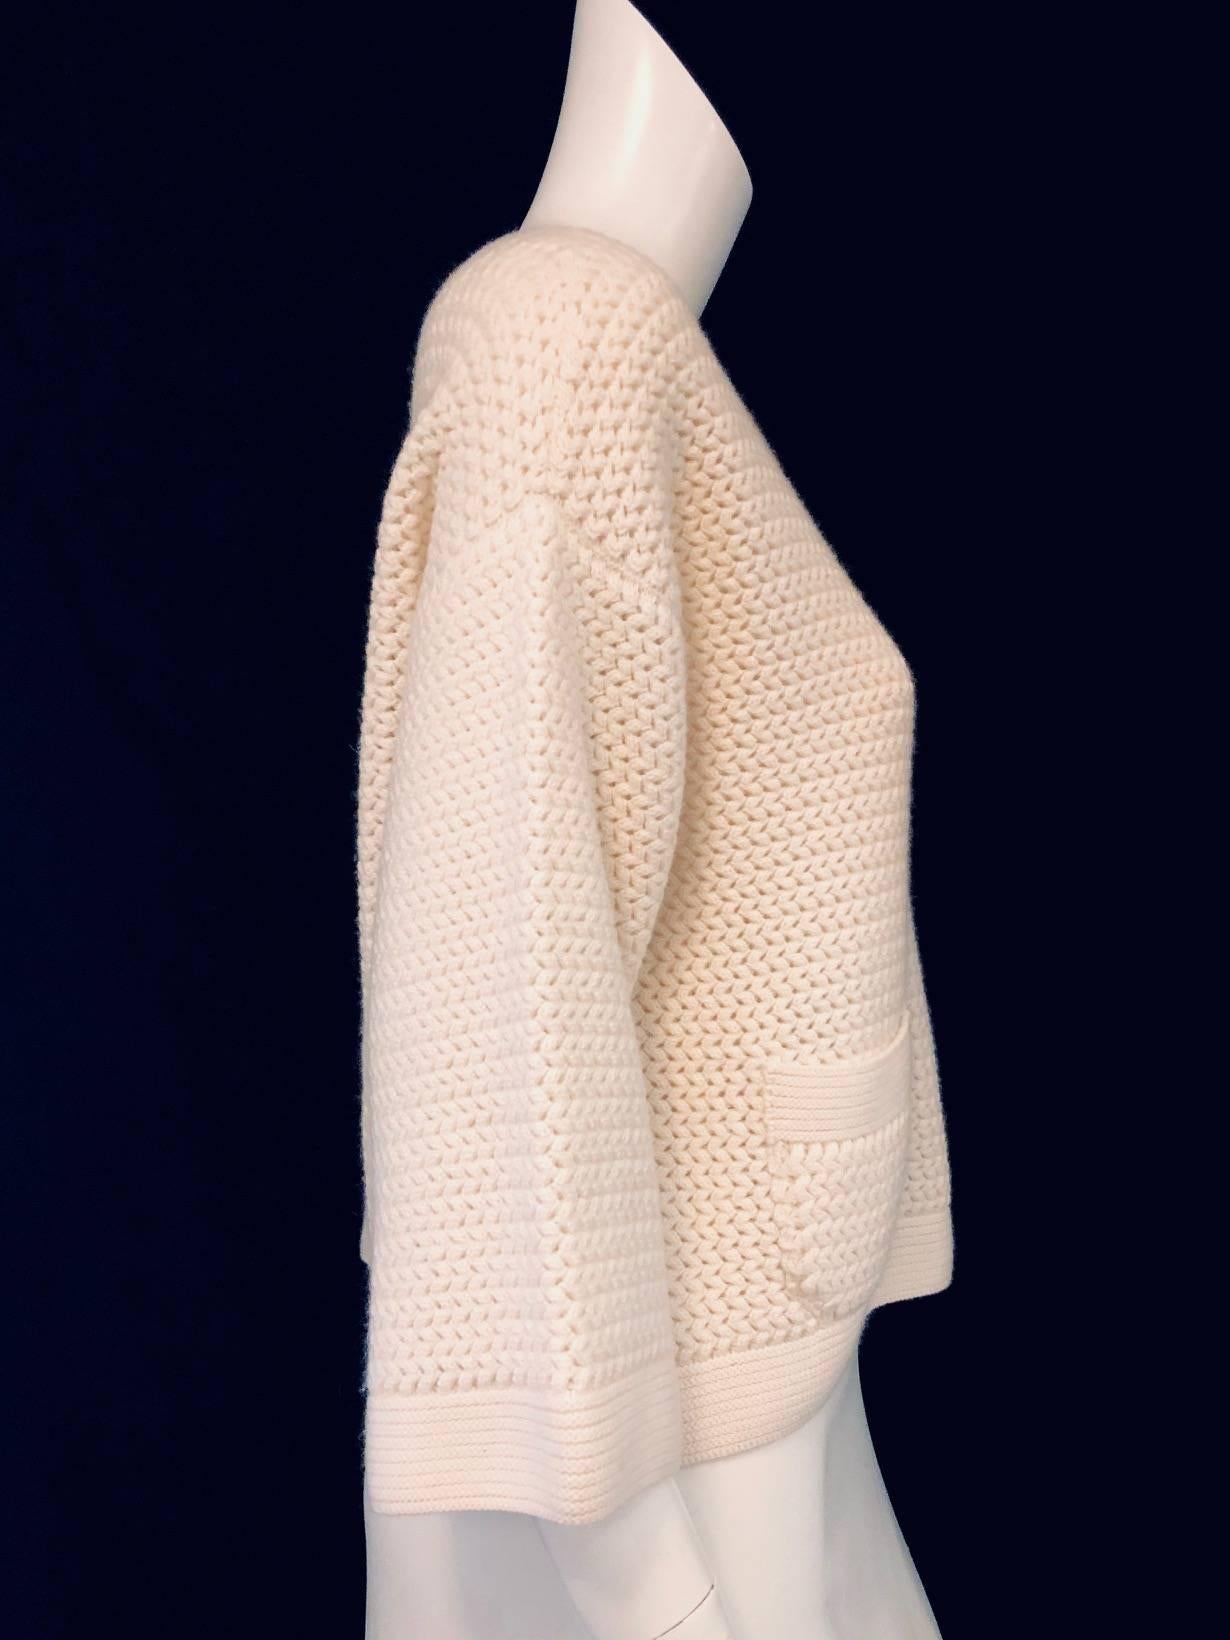 Chanel ivory cashmere crochet sweater features drop shoulders for that relaxed comfy look.  The bateau neckline with ribbed knit around it matches the ribbed knit around the hem and top of patch pockets.  One pocket has an enameled CC button for